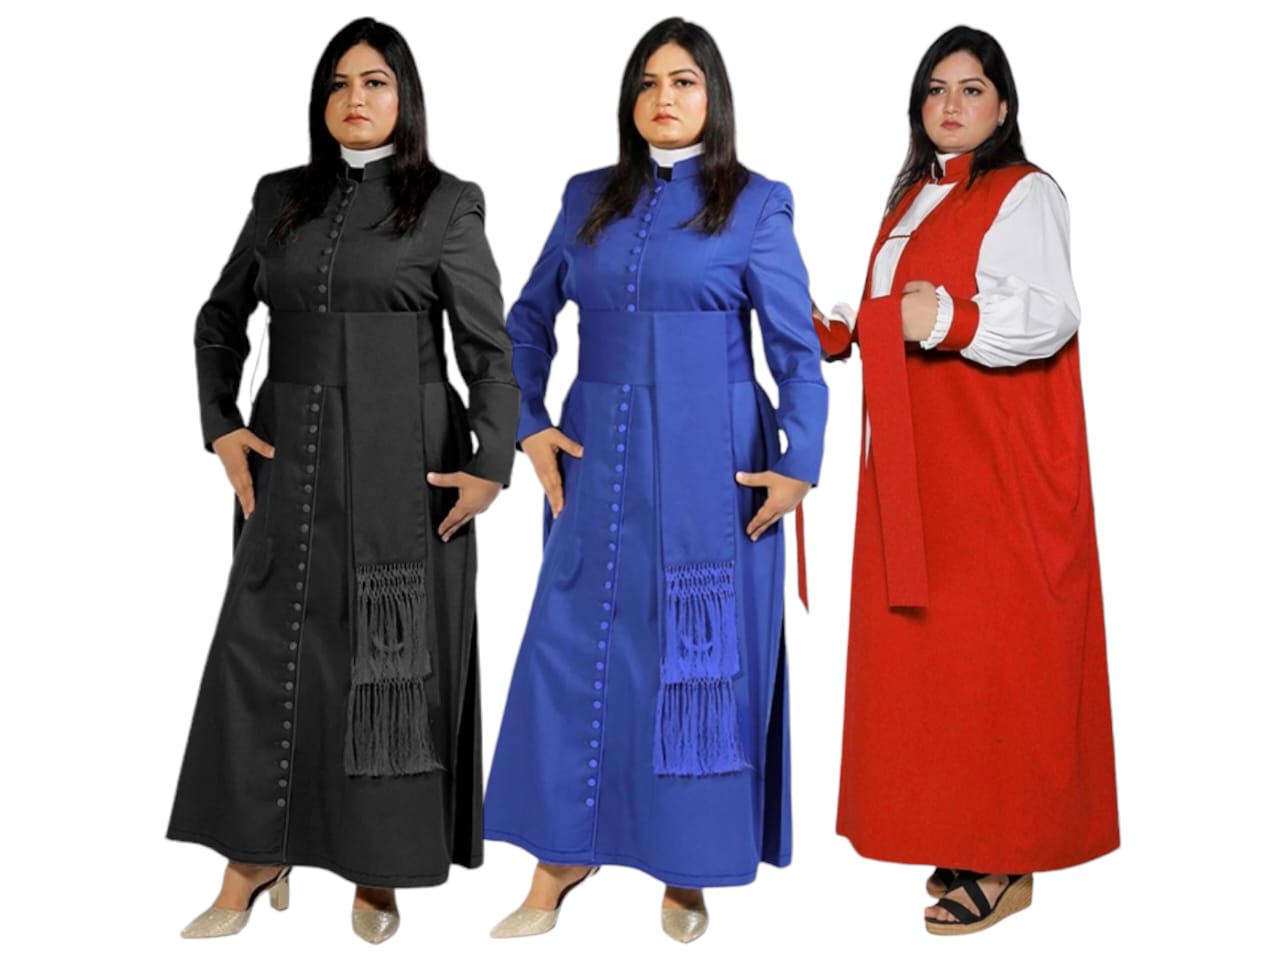 Elegant Women's Pastor Robe - Various Sizes and Colors